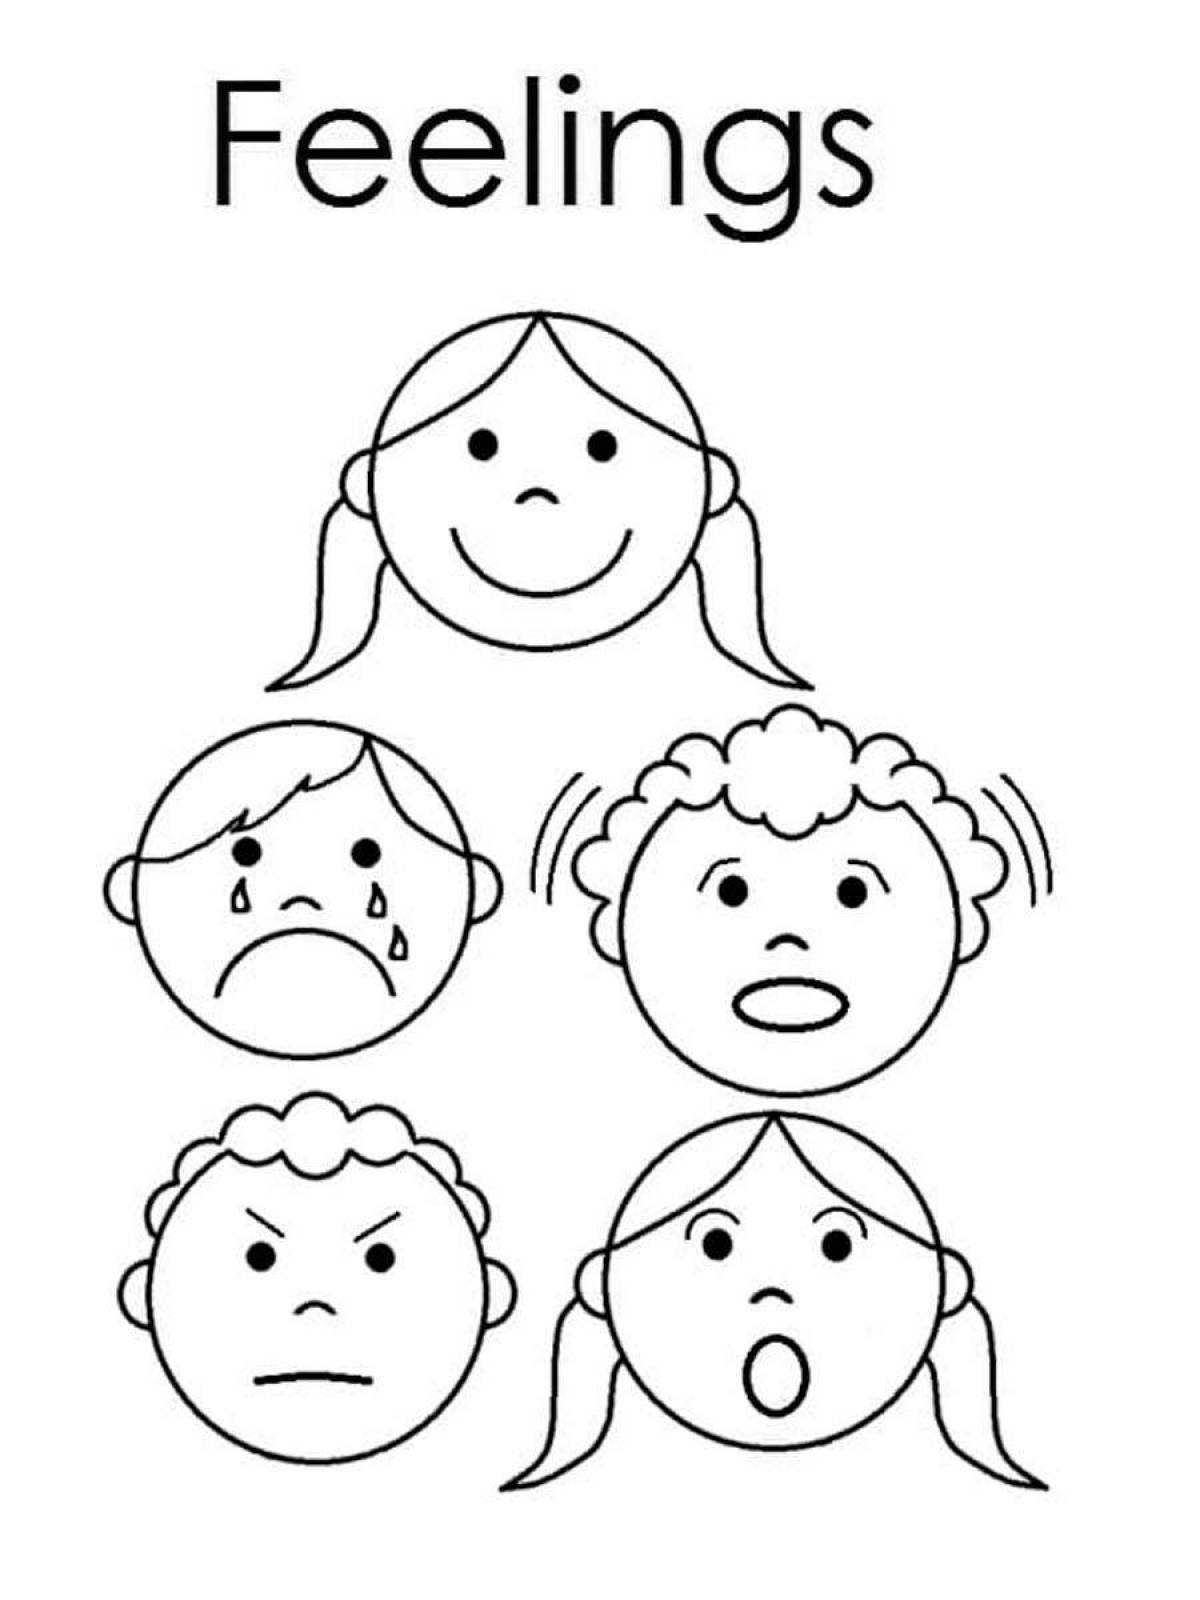 Lonely coloring emotions and feelings for children